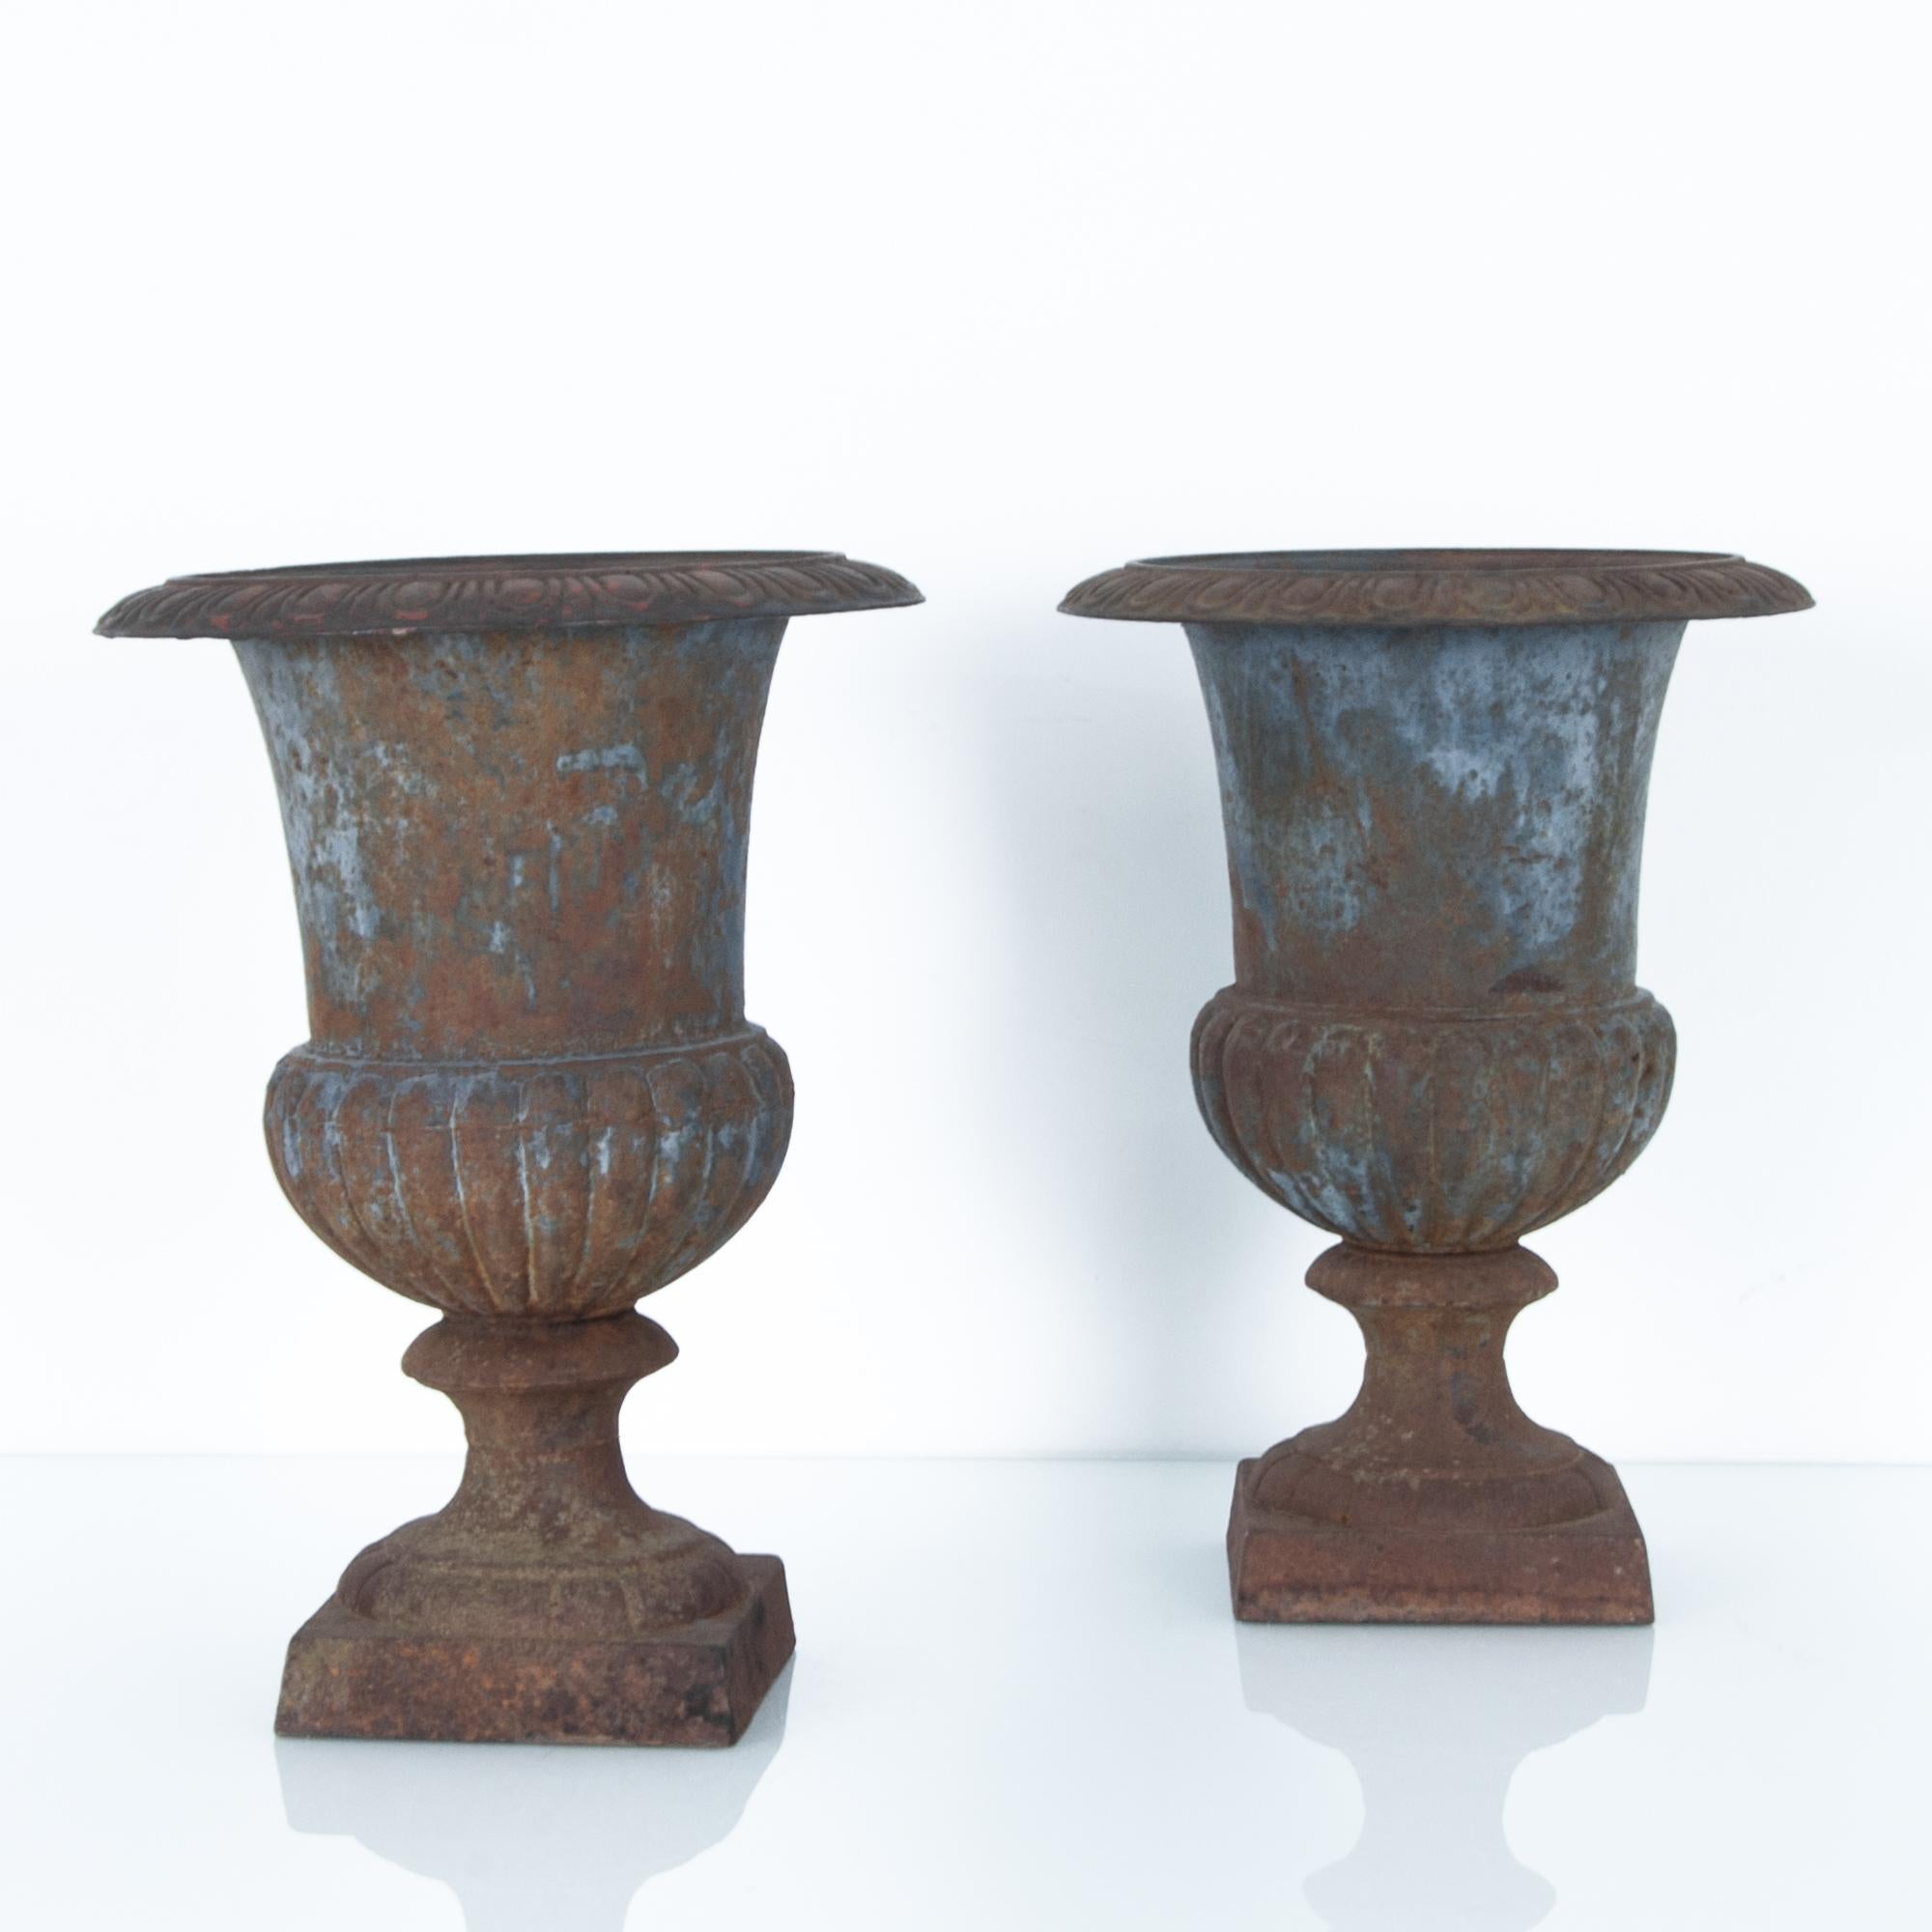 A pair of cast iron urns from France circa 1900. A venerated piece of garden furniture, the deep blue enamel is complimented by an oxidized patina. A green accent for a space needing texture.